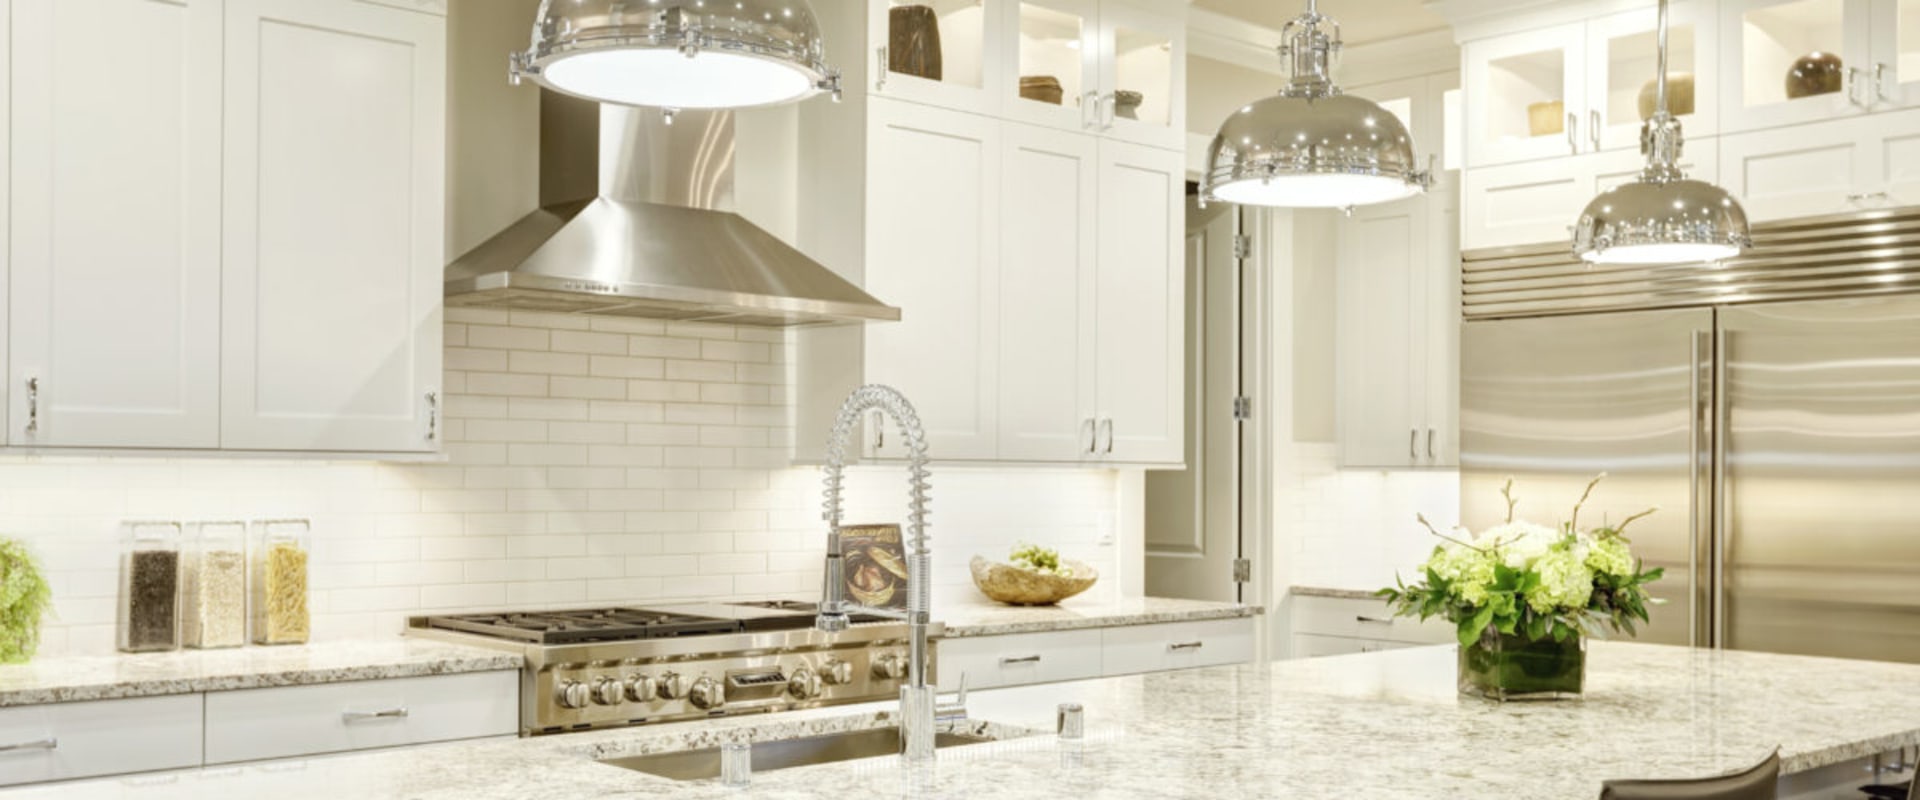 Countertop Materials and Options: Enhancing Your Home's Interior Design